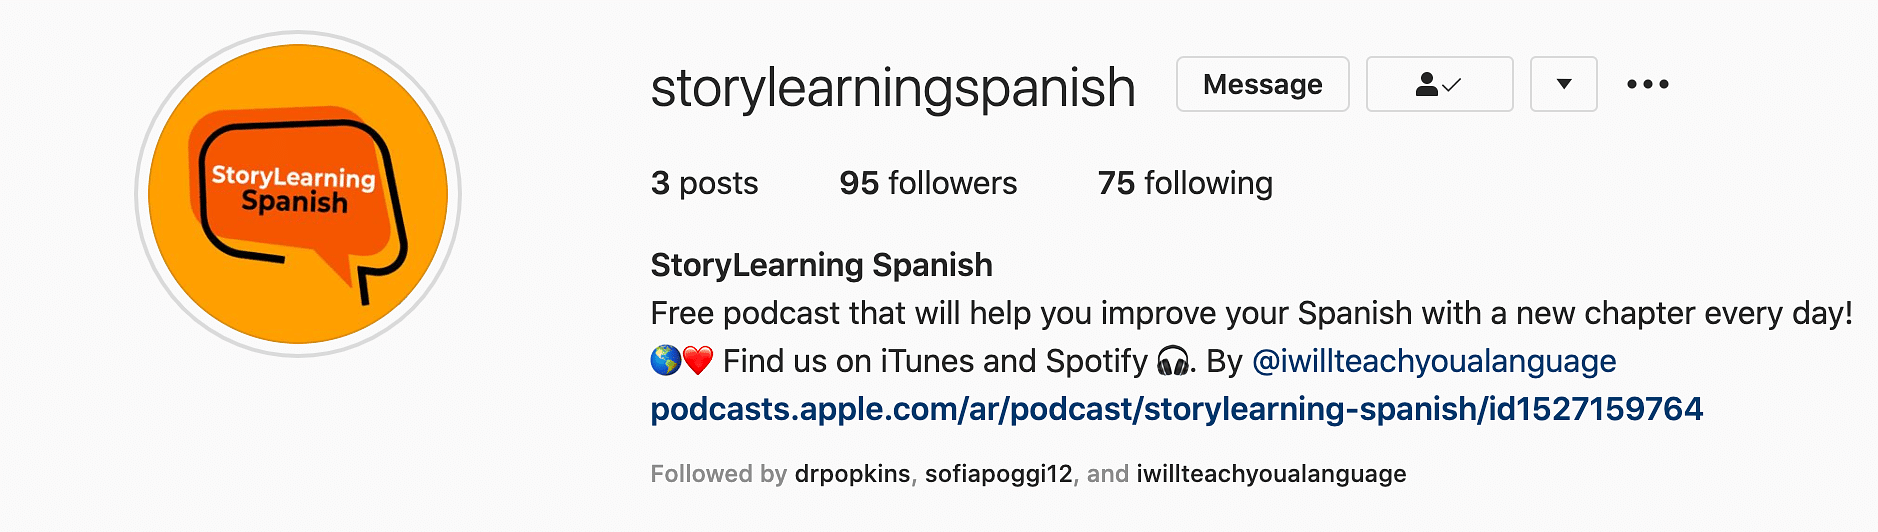 learn spanish podcasts free